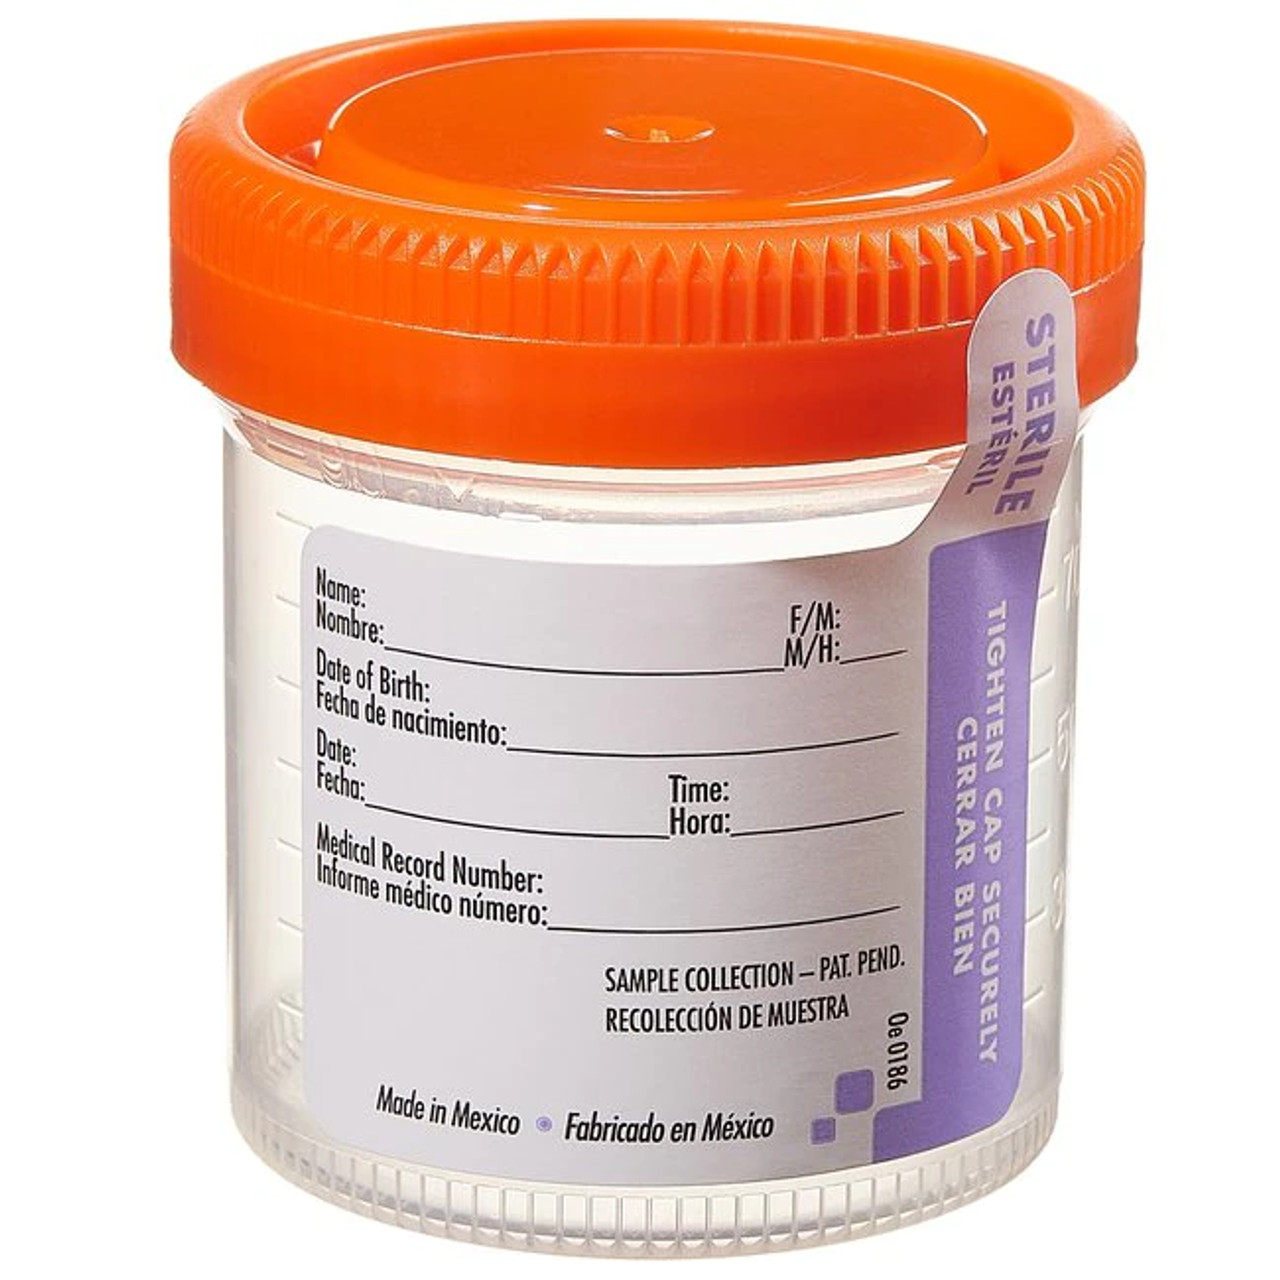 Collection Container 90mL x 53mm Sterile Labeled Orange Cap 100/Bag, 400/Case